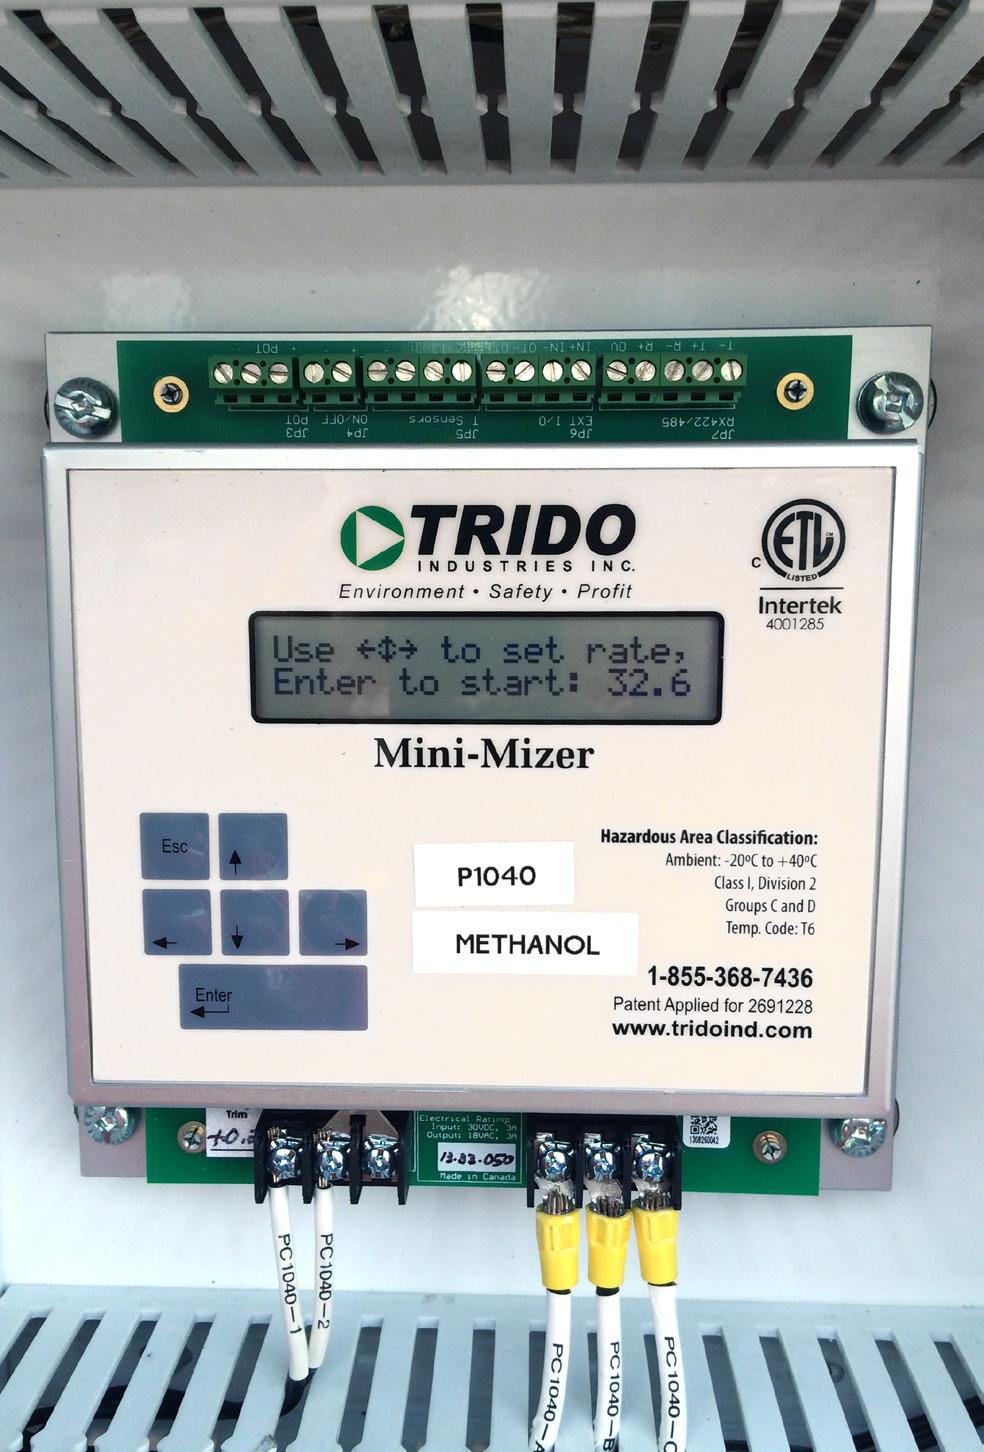 Where other systems freeze up, and the use of bottled gas is inefficient, the TRIDO compressor stands alone in its capacity to provide reliable instrument air.